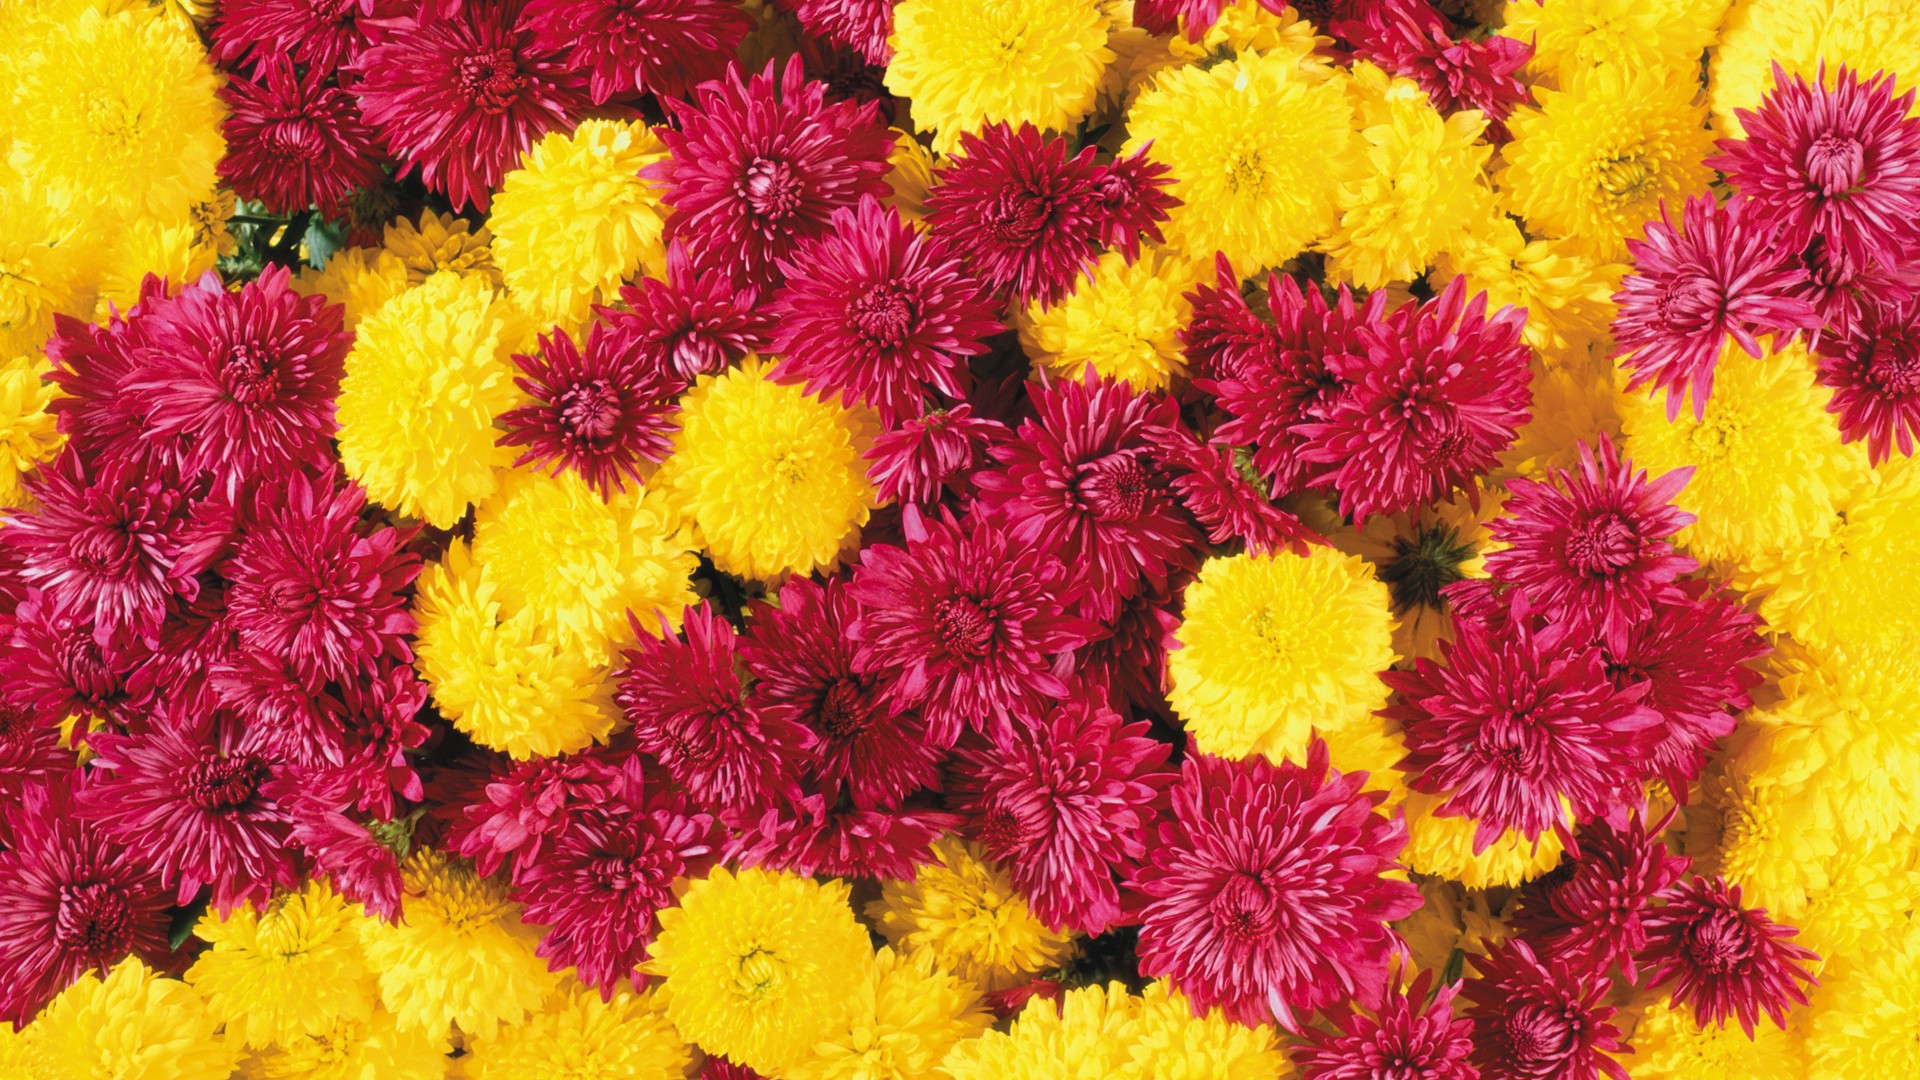  Flowers HQ Background Images